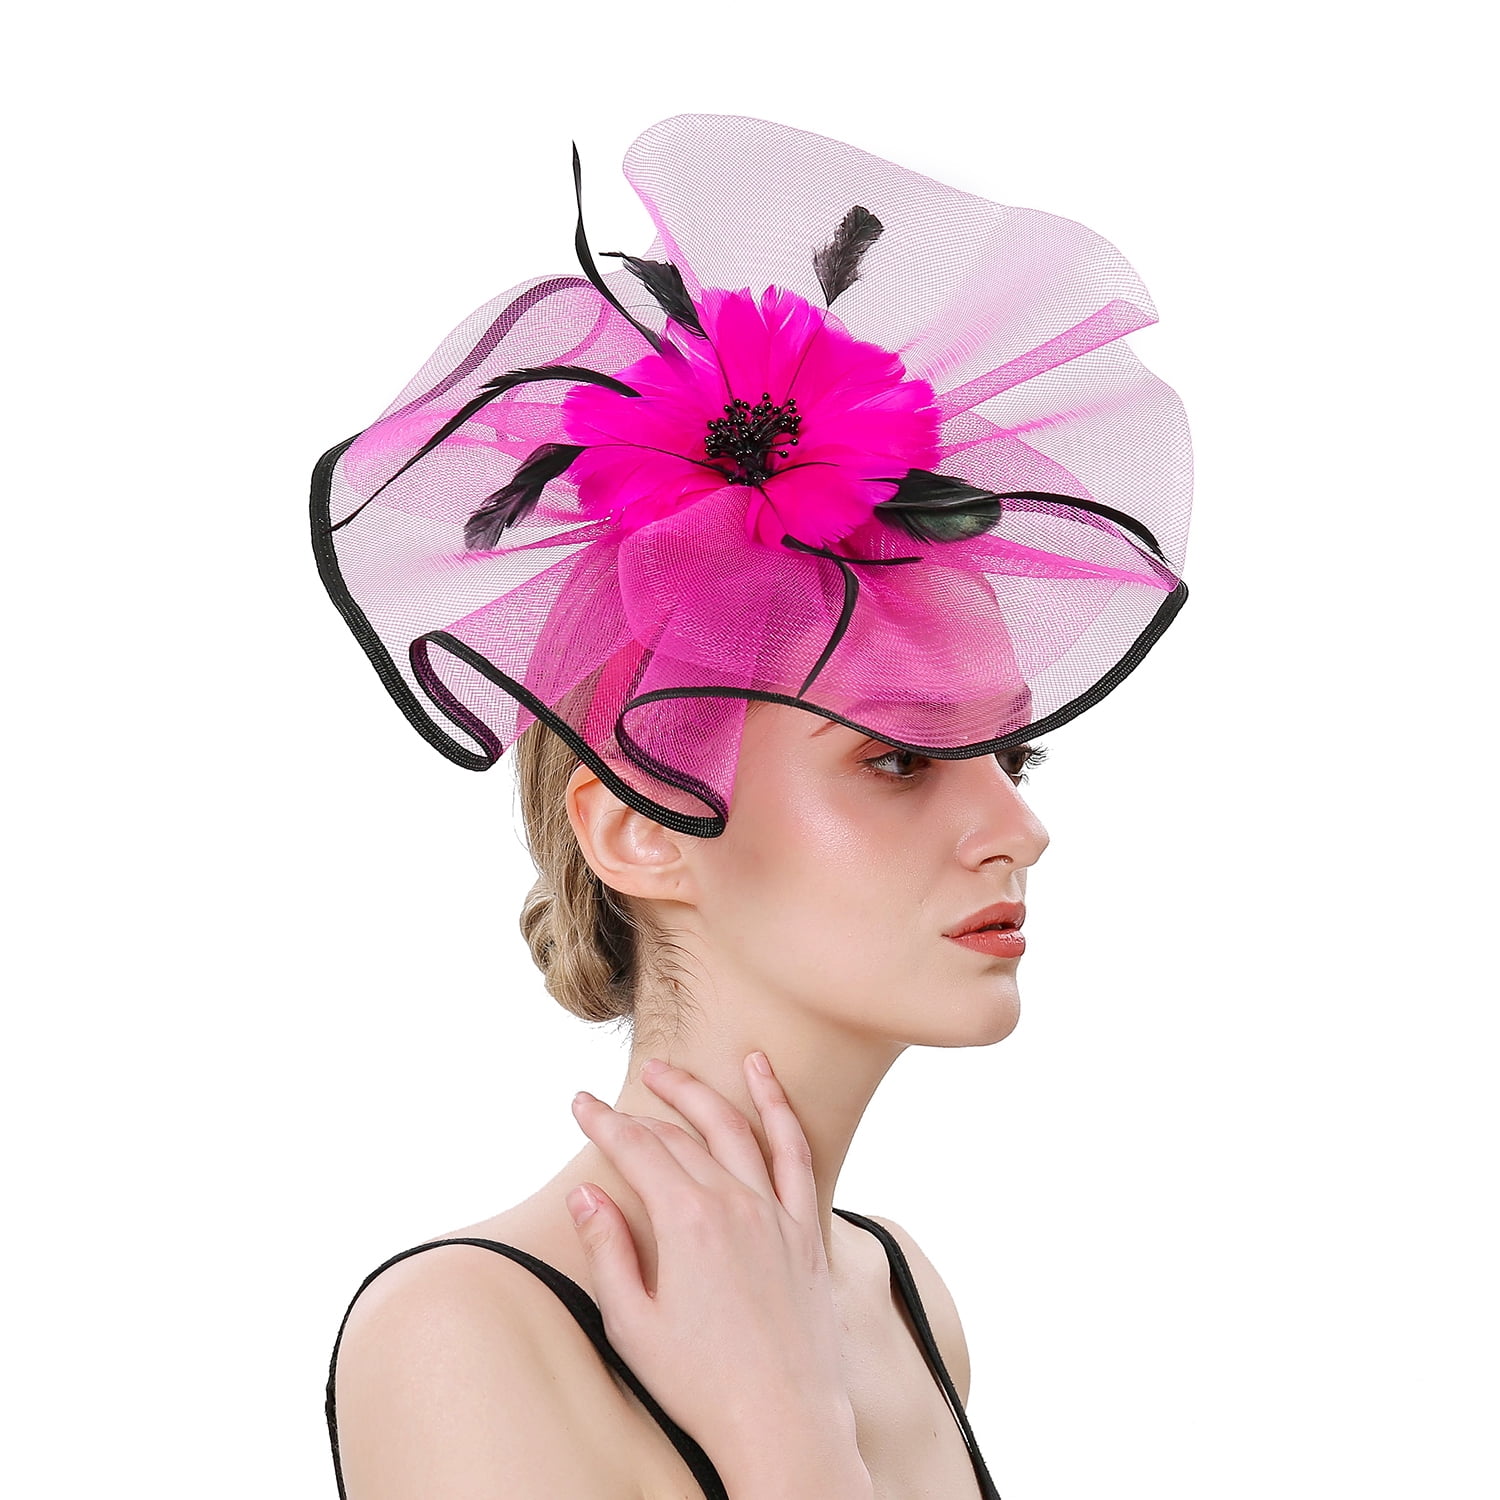 Women's Veil Fascinators Cocktail Party Wedding Feather Mini Top Hats Pin Clips 